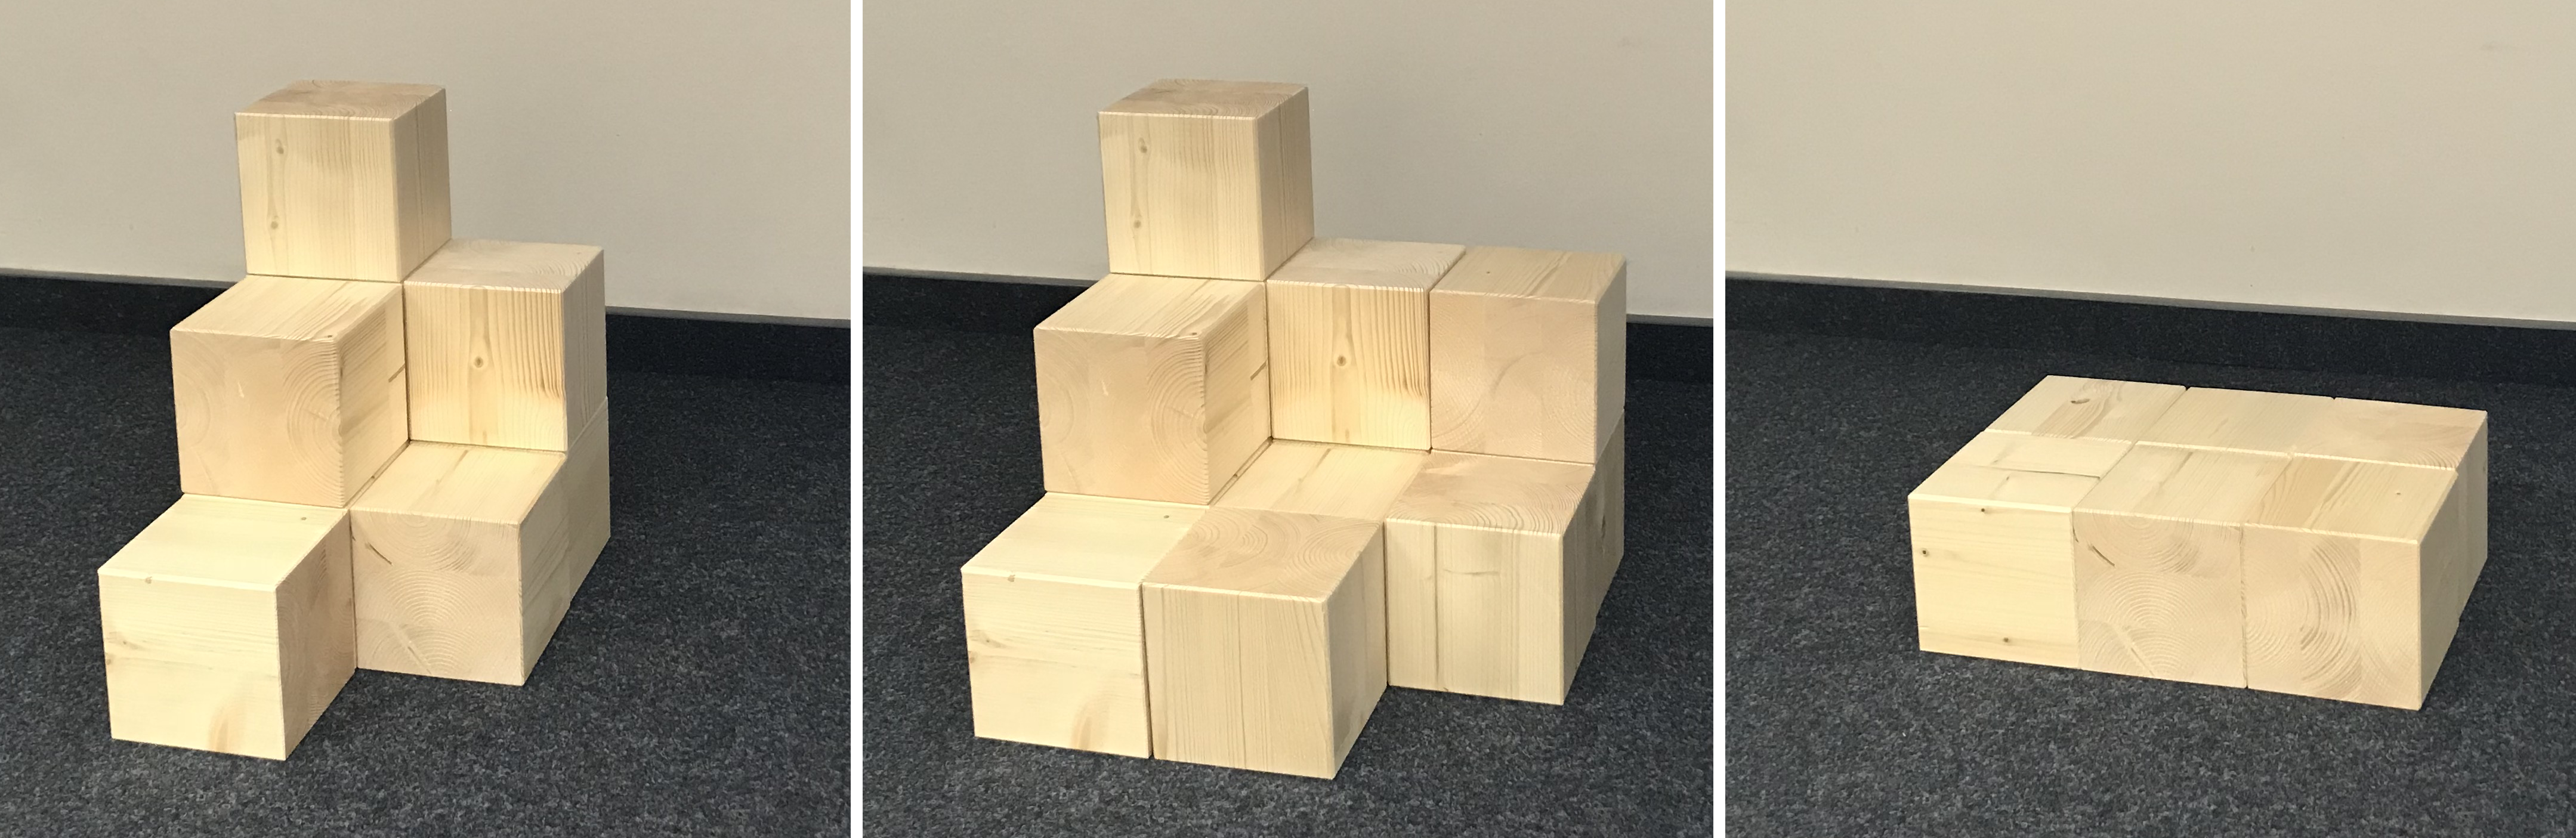 Cube structure